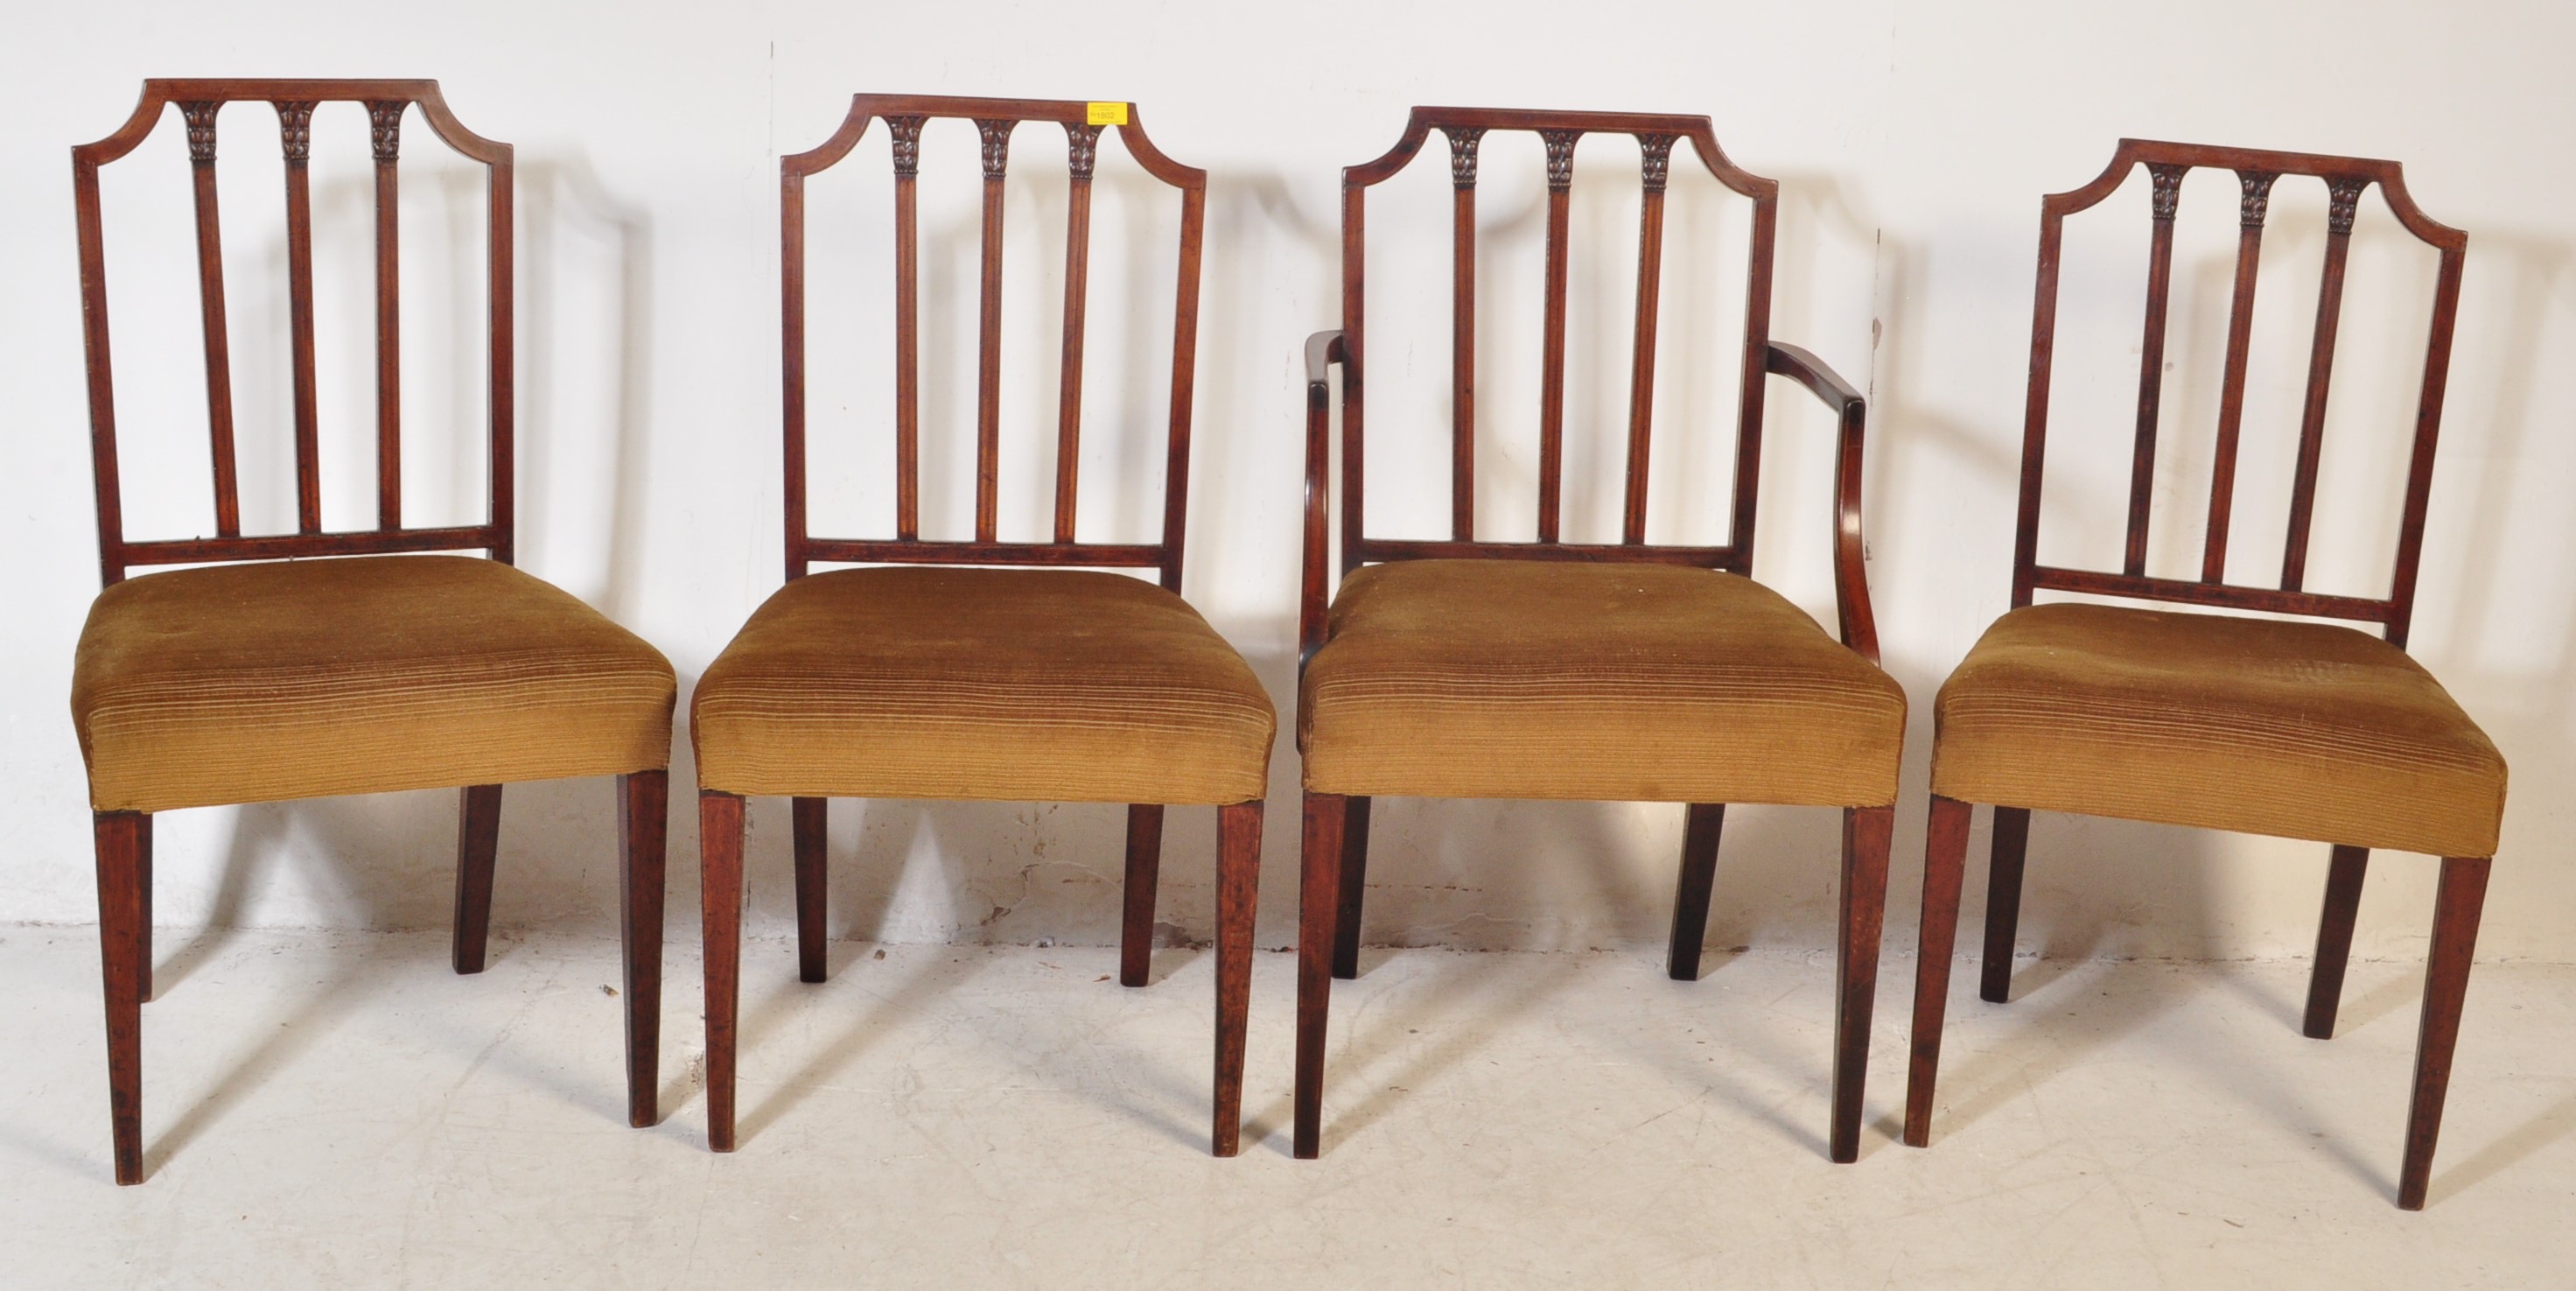 FOUR EDWARDIAN INLAID MAHOGANY DINING CHAIRS - Image 2 of 6